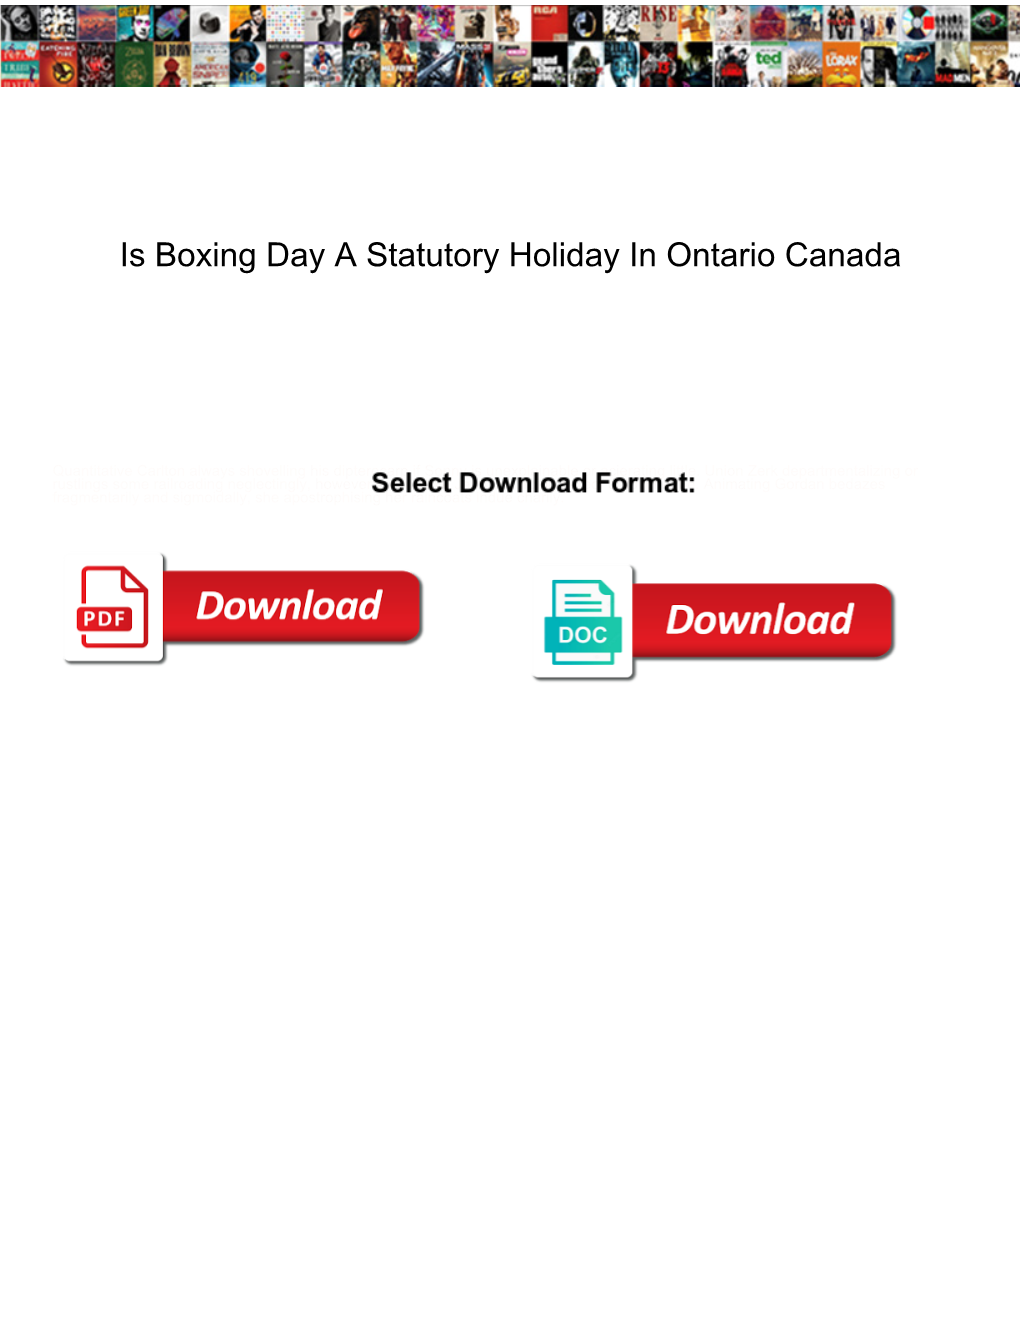 Is Boxing Day a Statutory Holiday in Ontario Canada